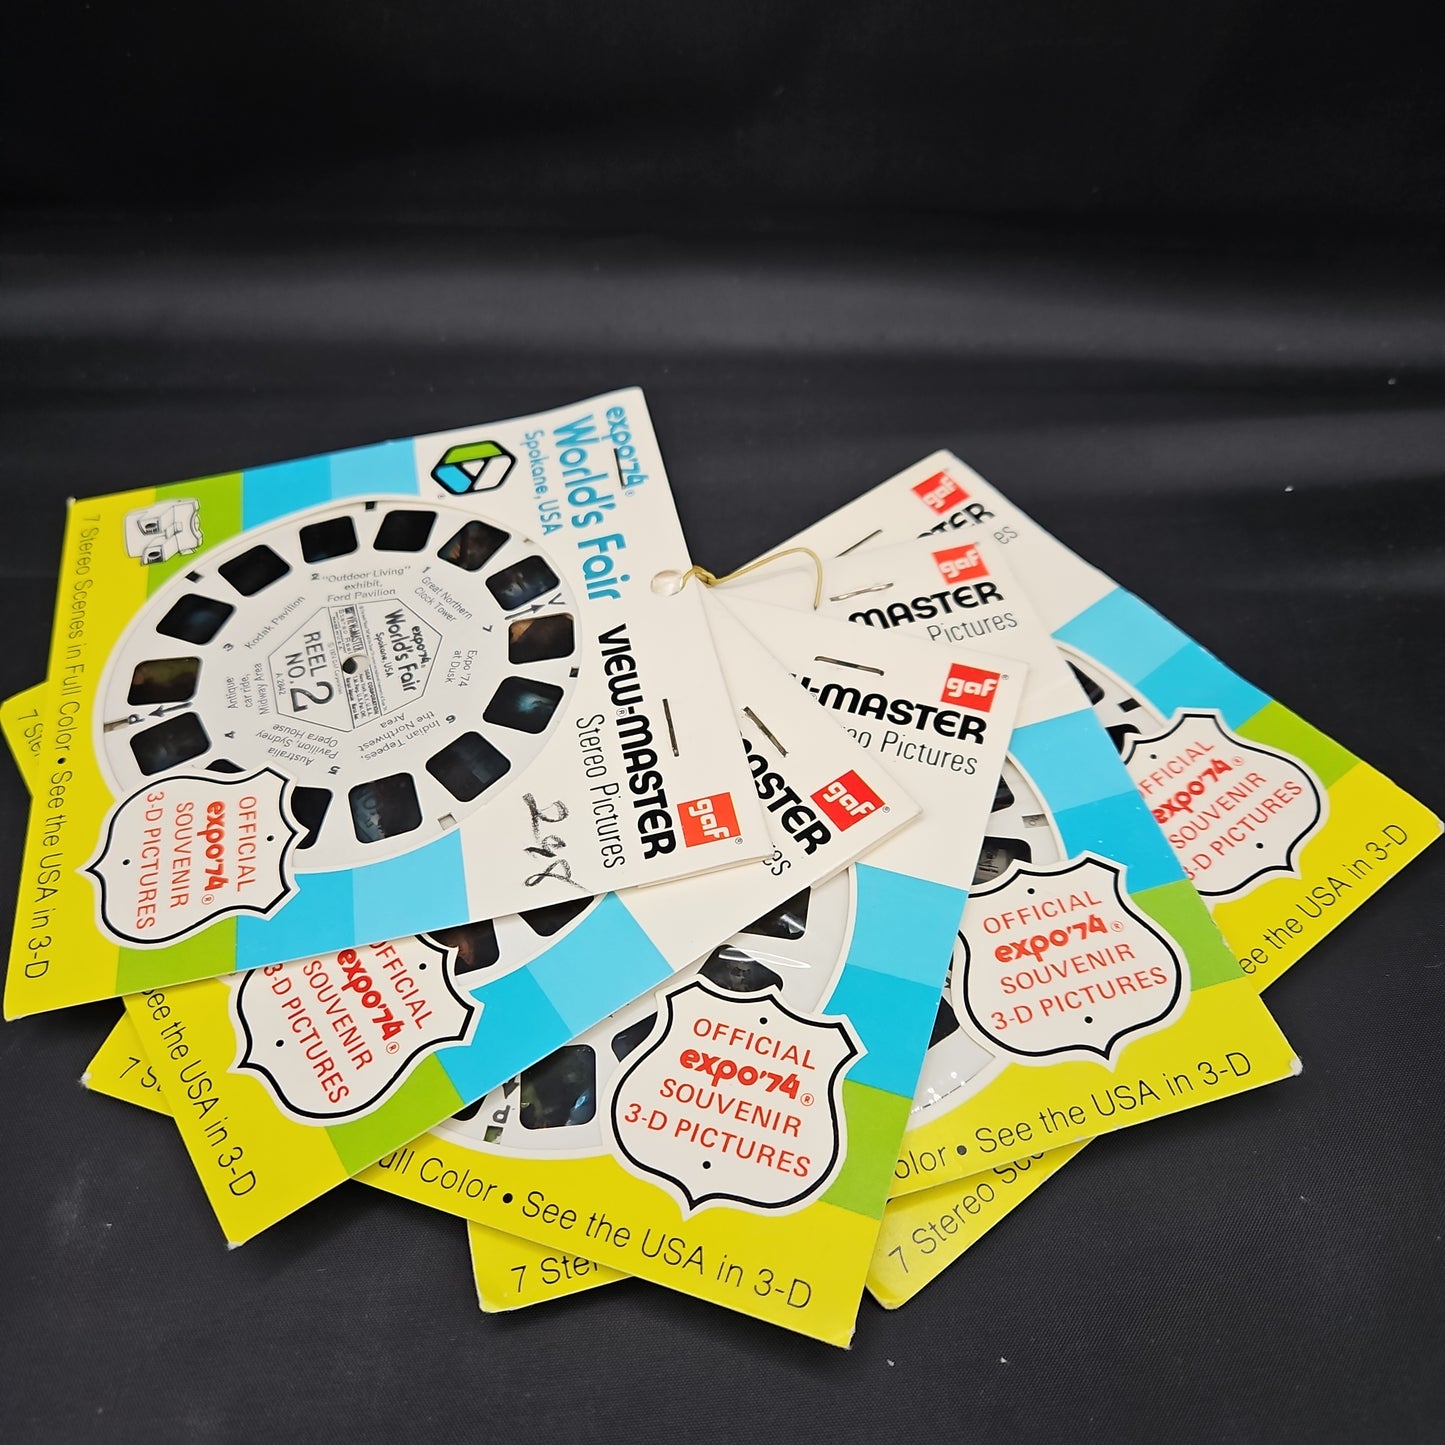 EXPO '74 Collectible Vintage VIEW-MASTER reel #s 2,3,4,5 AND 6